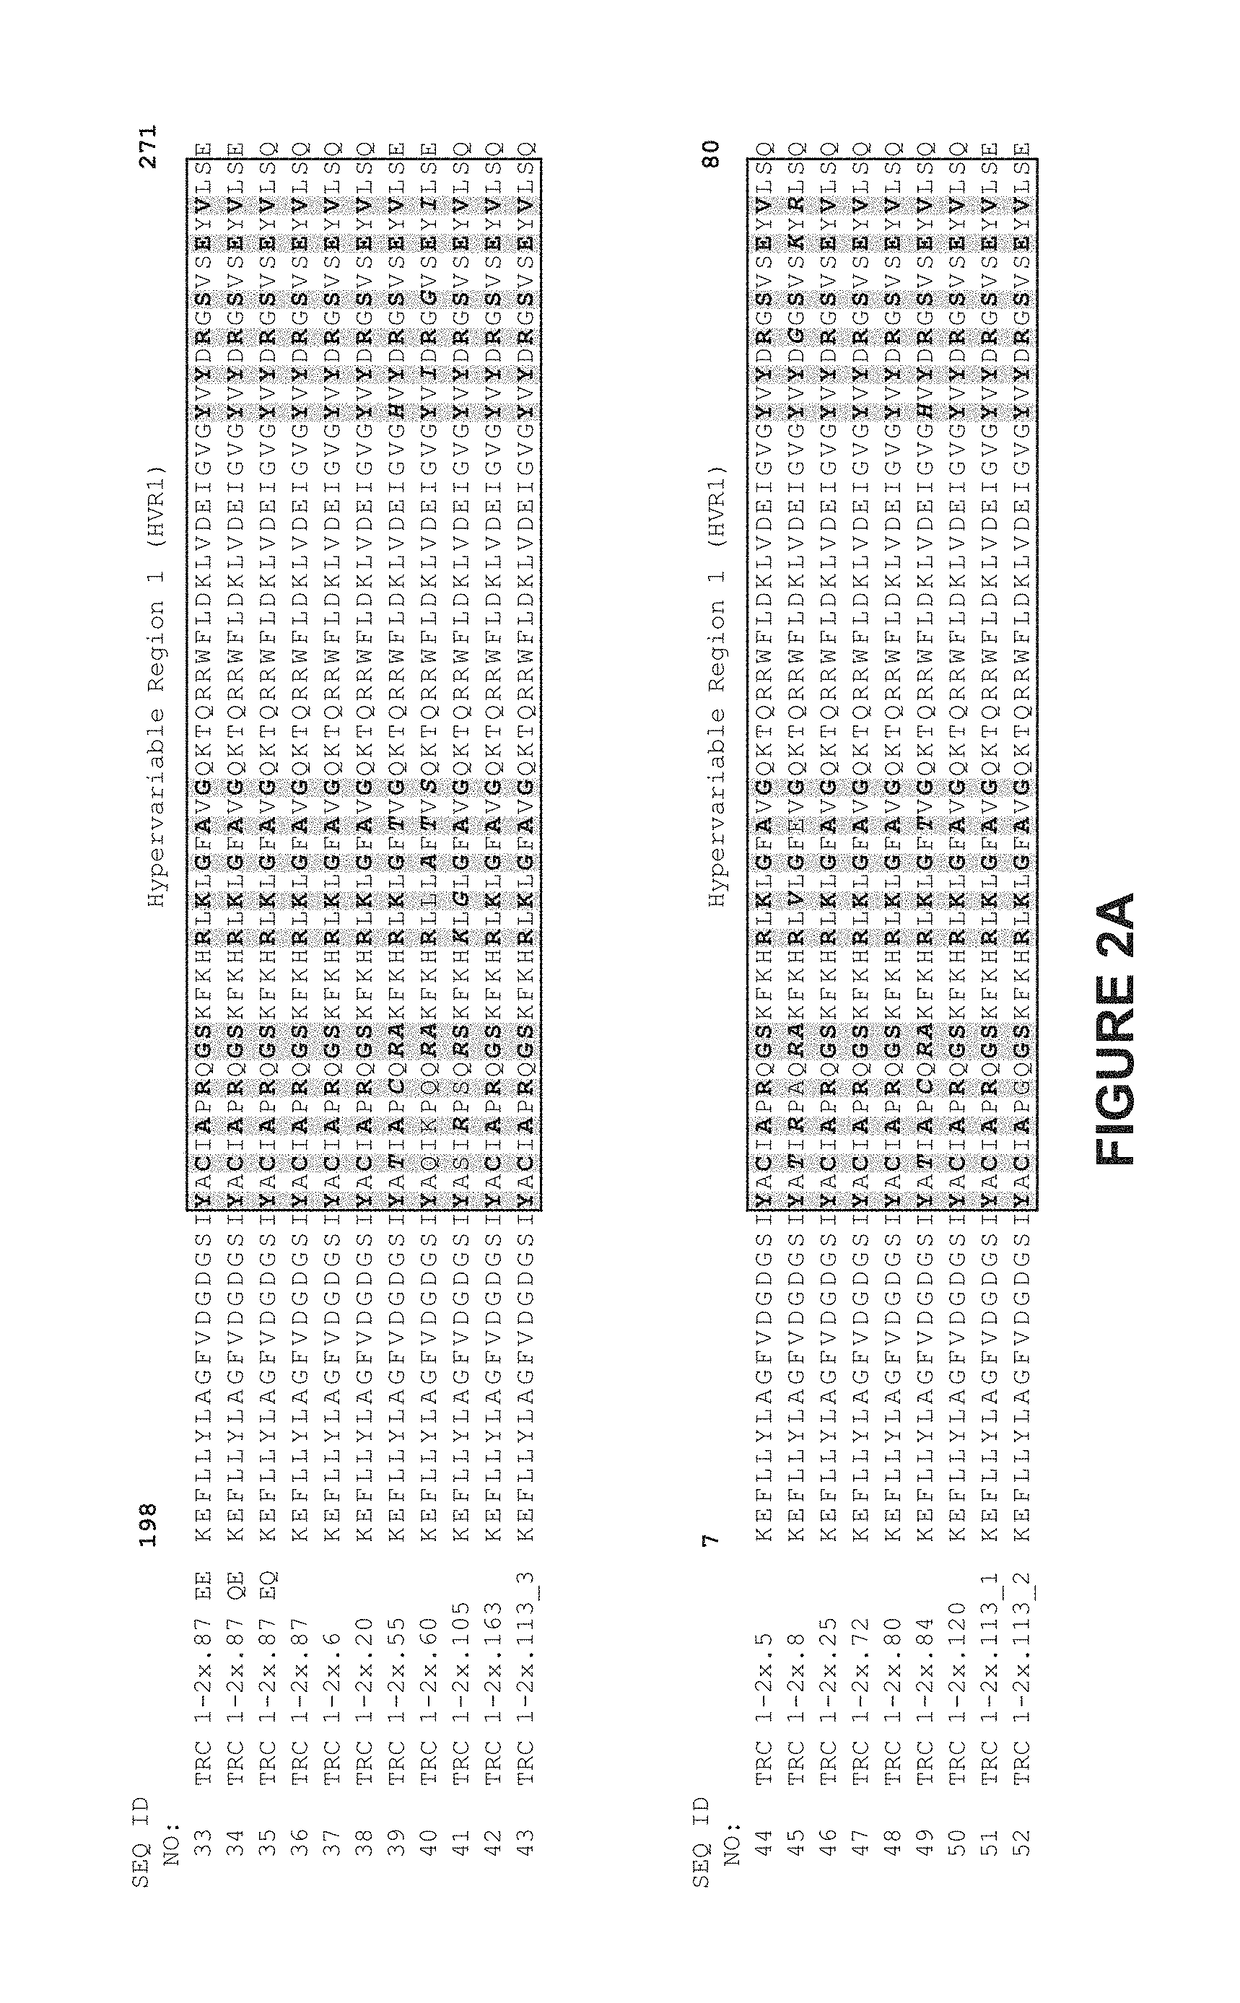 Genetically-modified cells comprising a modified human T cell receptor alpha constant region gene